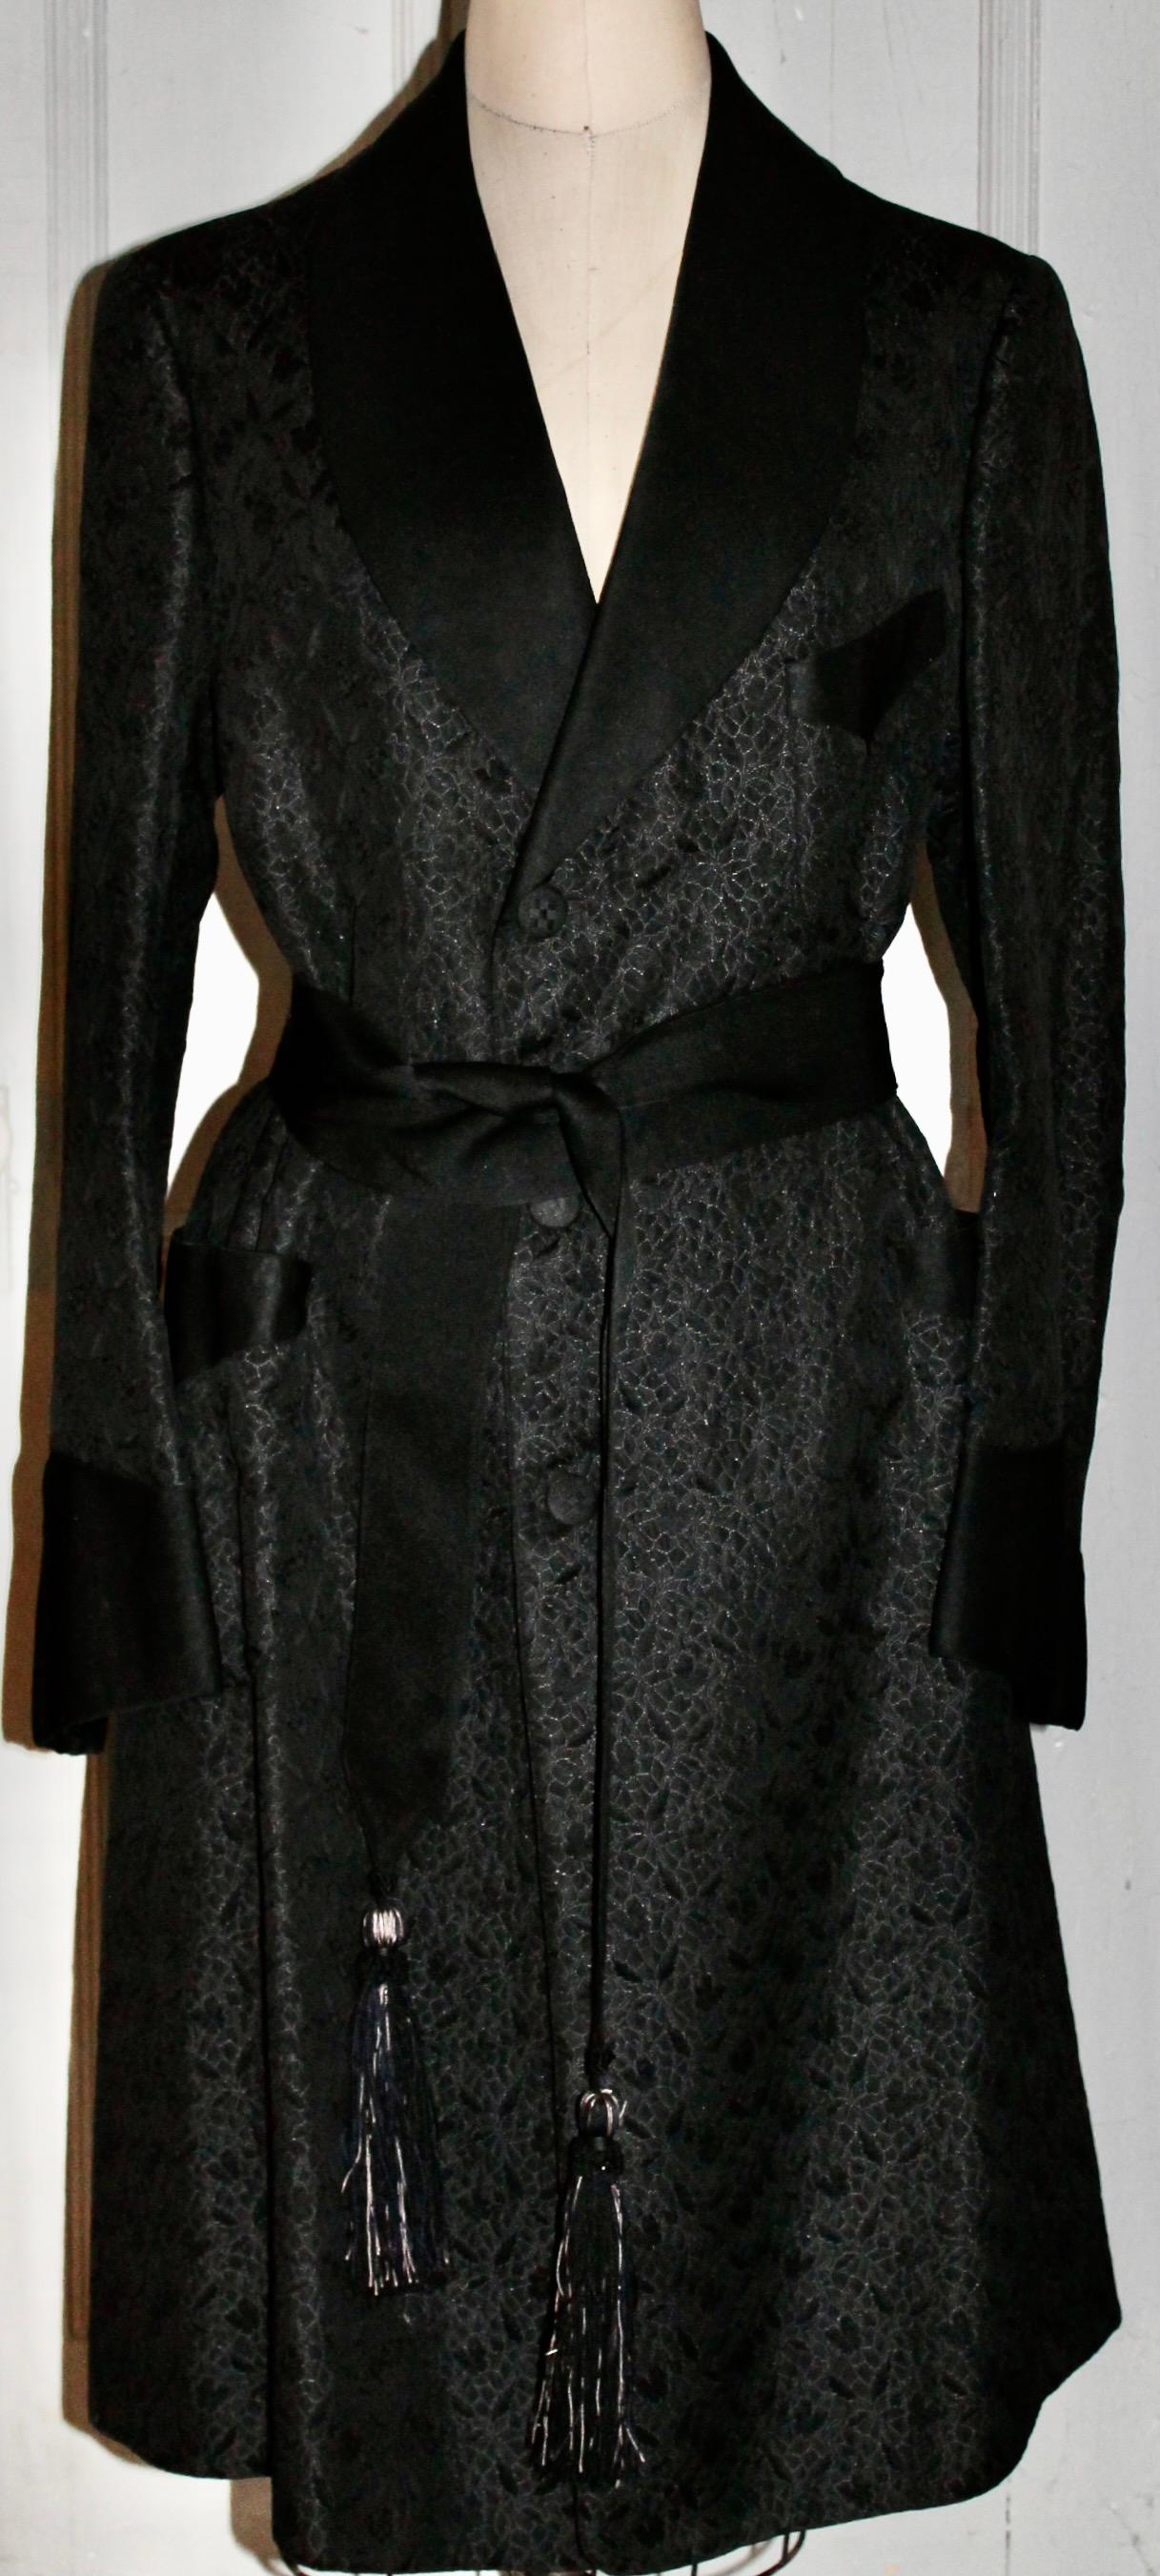 A Berkey R. Merwin silk smoking jacket/coat. 681 Fifth Avenue NYC. Medium size, Sash Belt with Silk Tassels, fully Lined. Two labels, one dated (Nov29,1923) and with the original owners name.